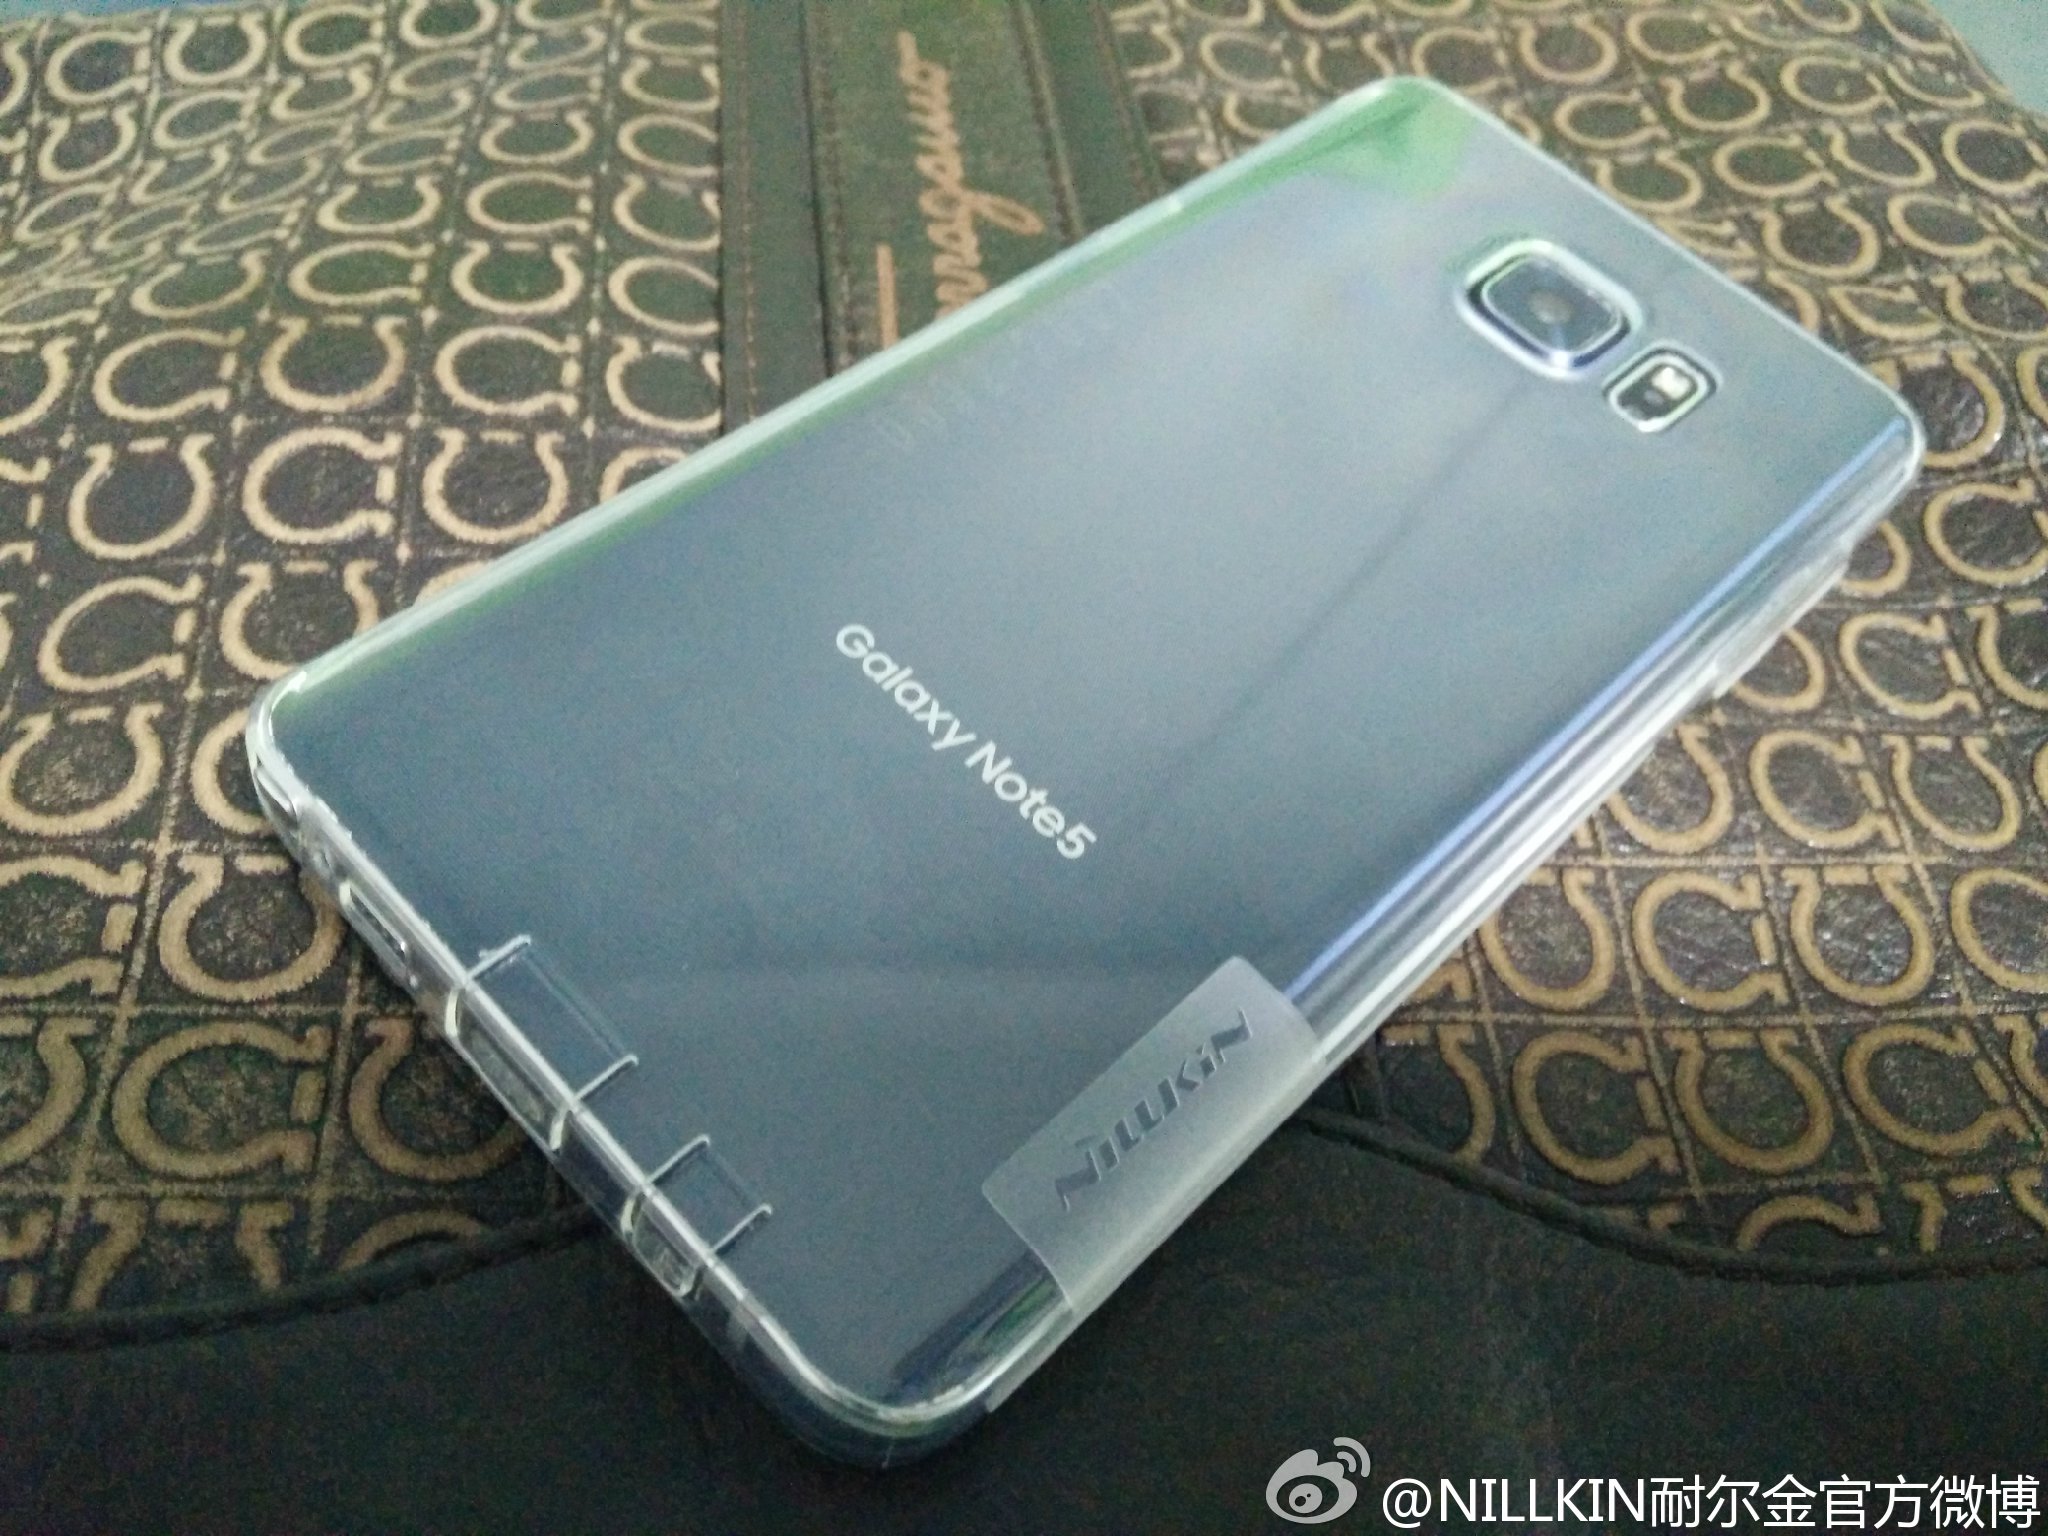 Samsung-Galaxy-Note-5-leaked-images-4